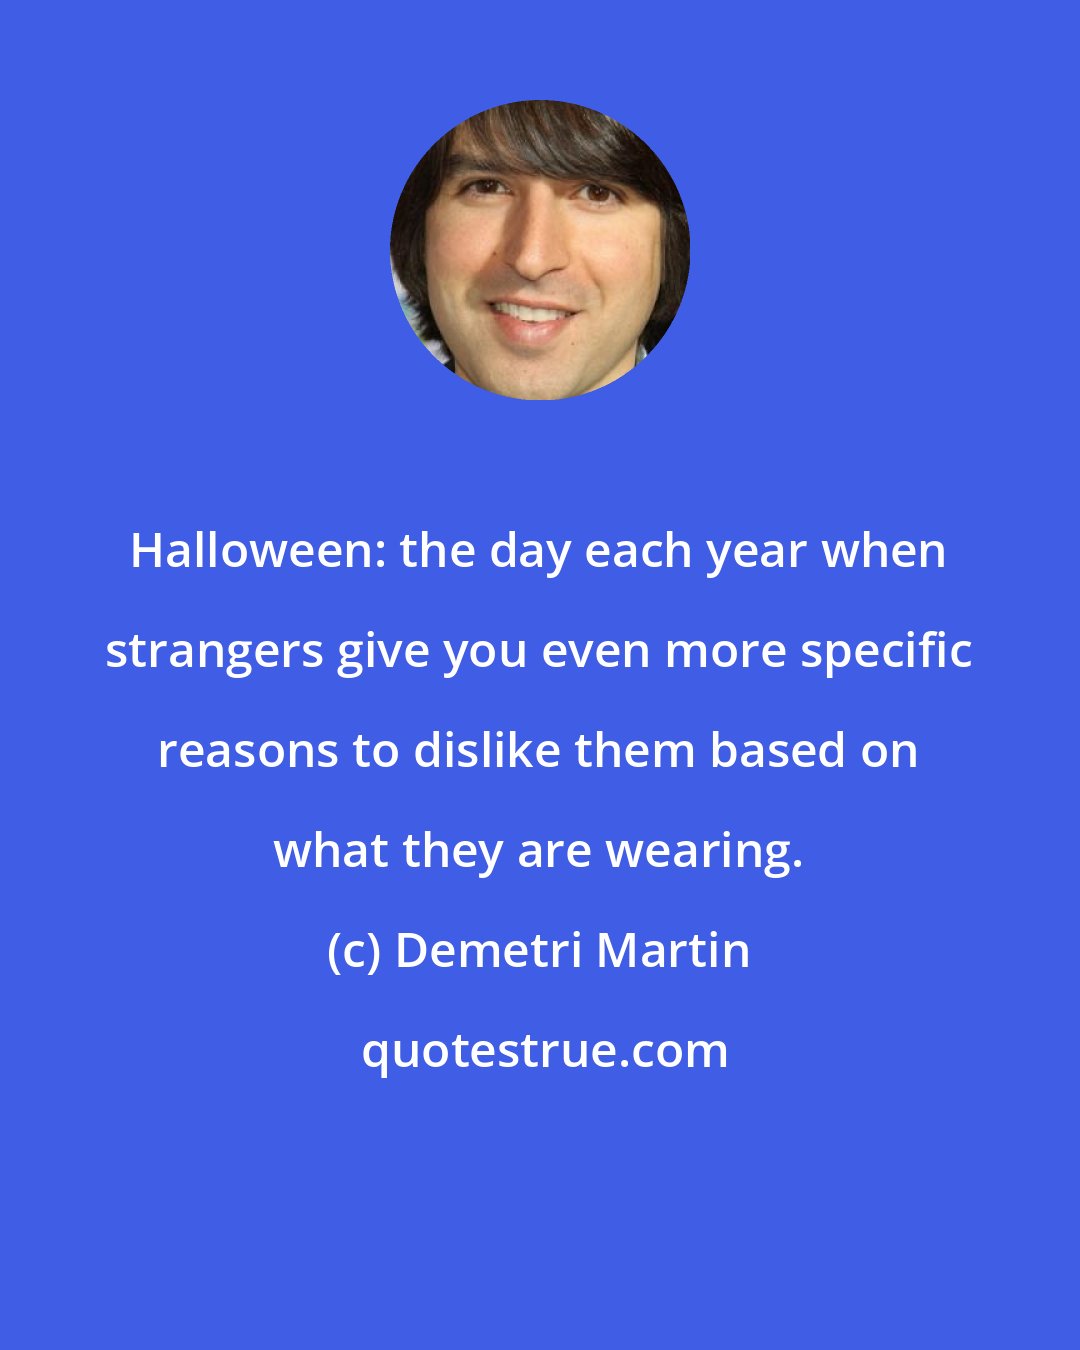 Demetri Martin: Halloween: the day each year when strangers give you even more specific reasons to dislike them based on what they are wearing.